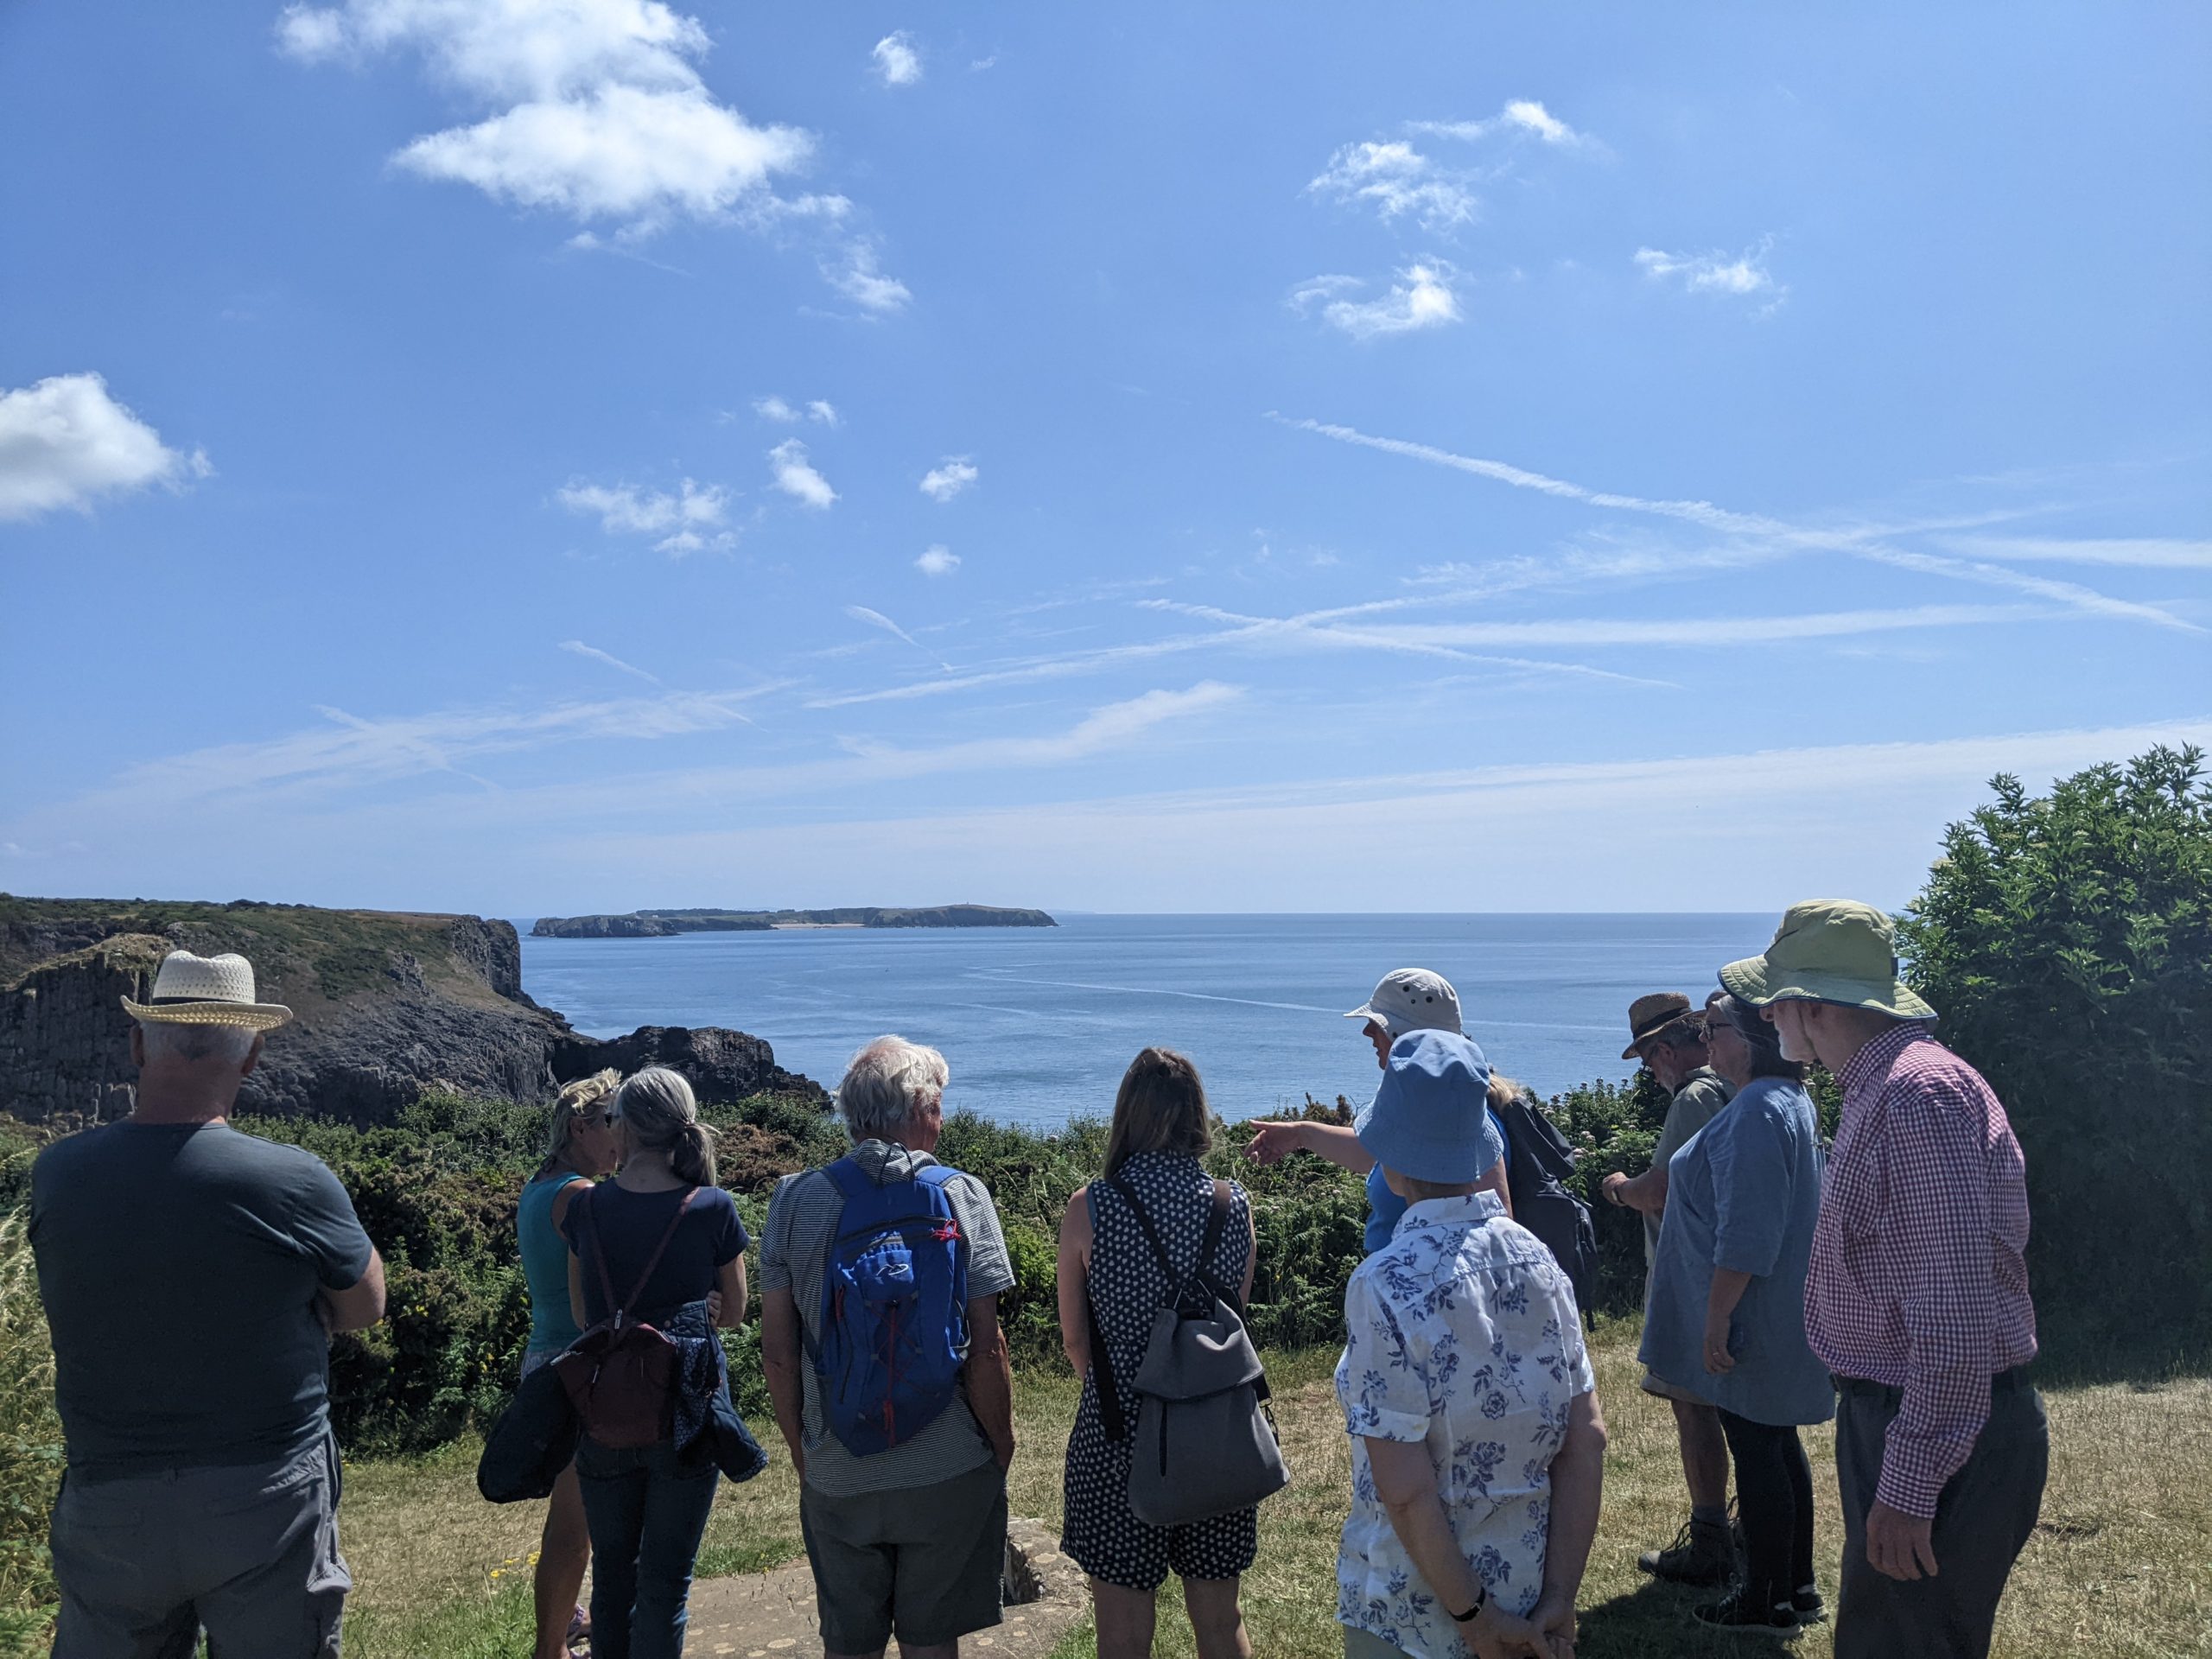 A group of individuals overlooking a beautiful view of the sea, cliffs and caldey island in the distance.